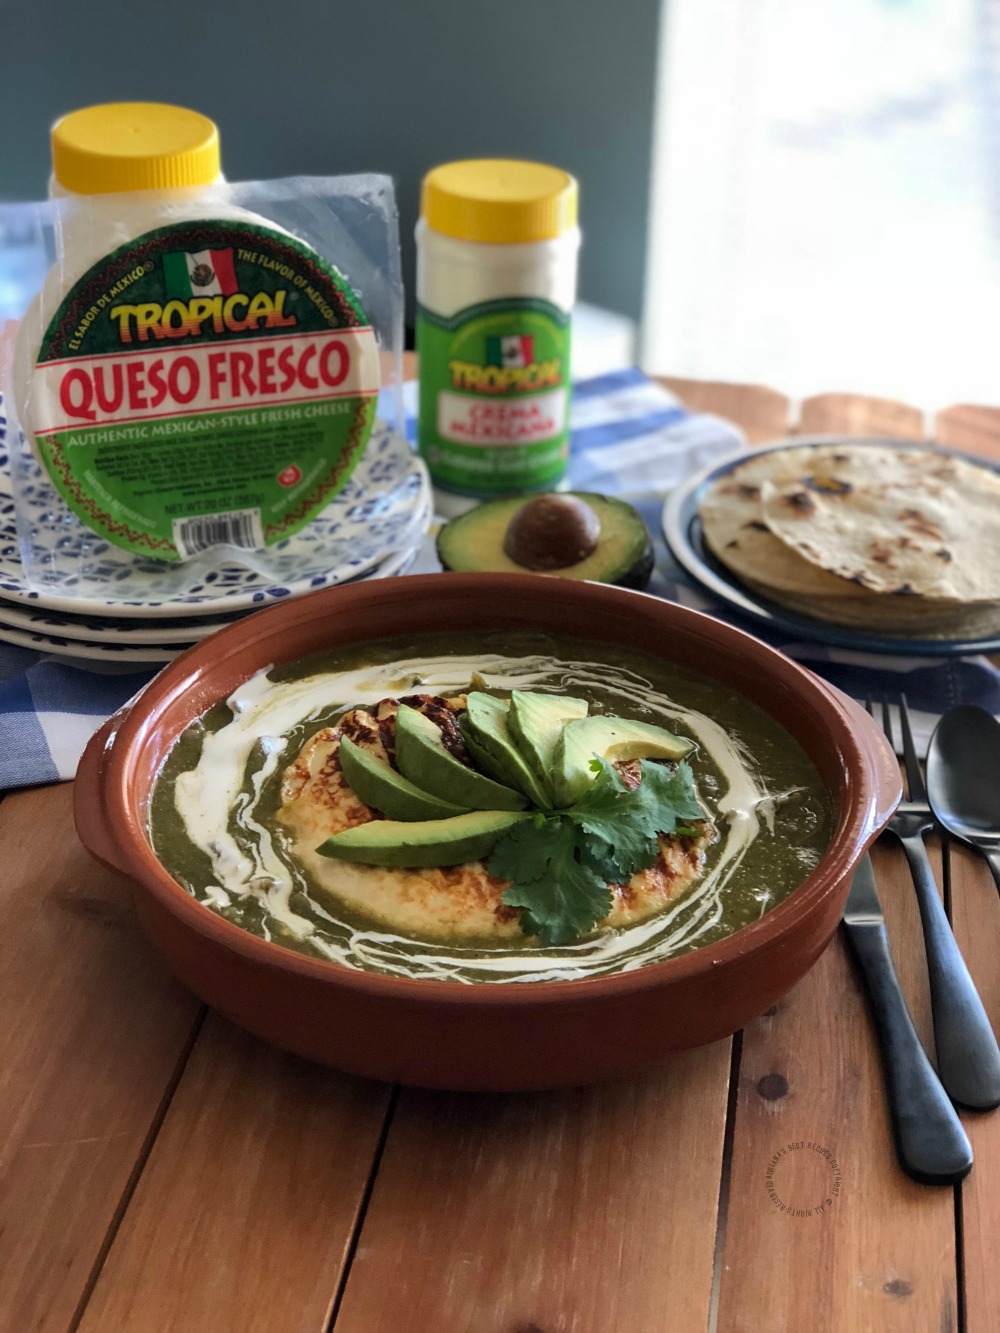 We love Tropical Queso Fresco Mexicano main ingredient to our grilled queso fresco appetizer